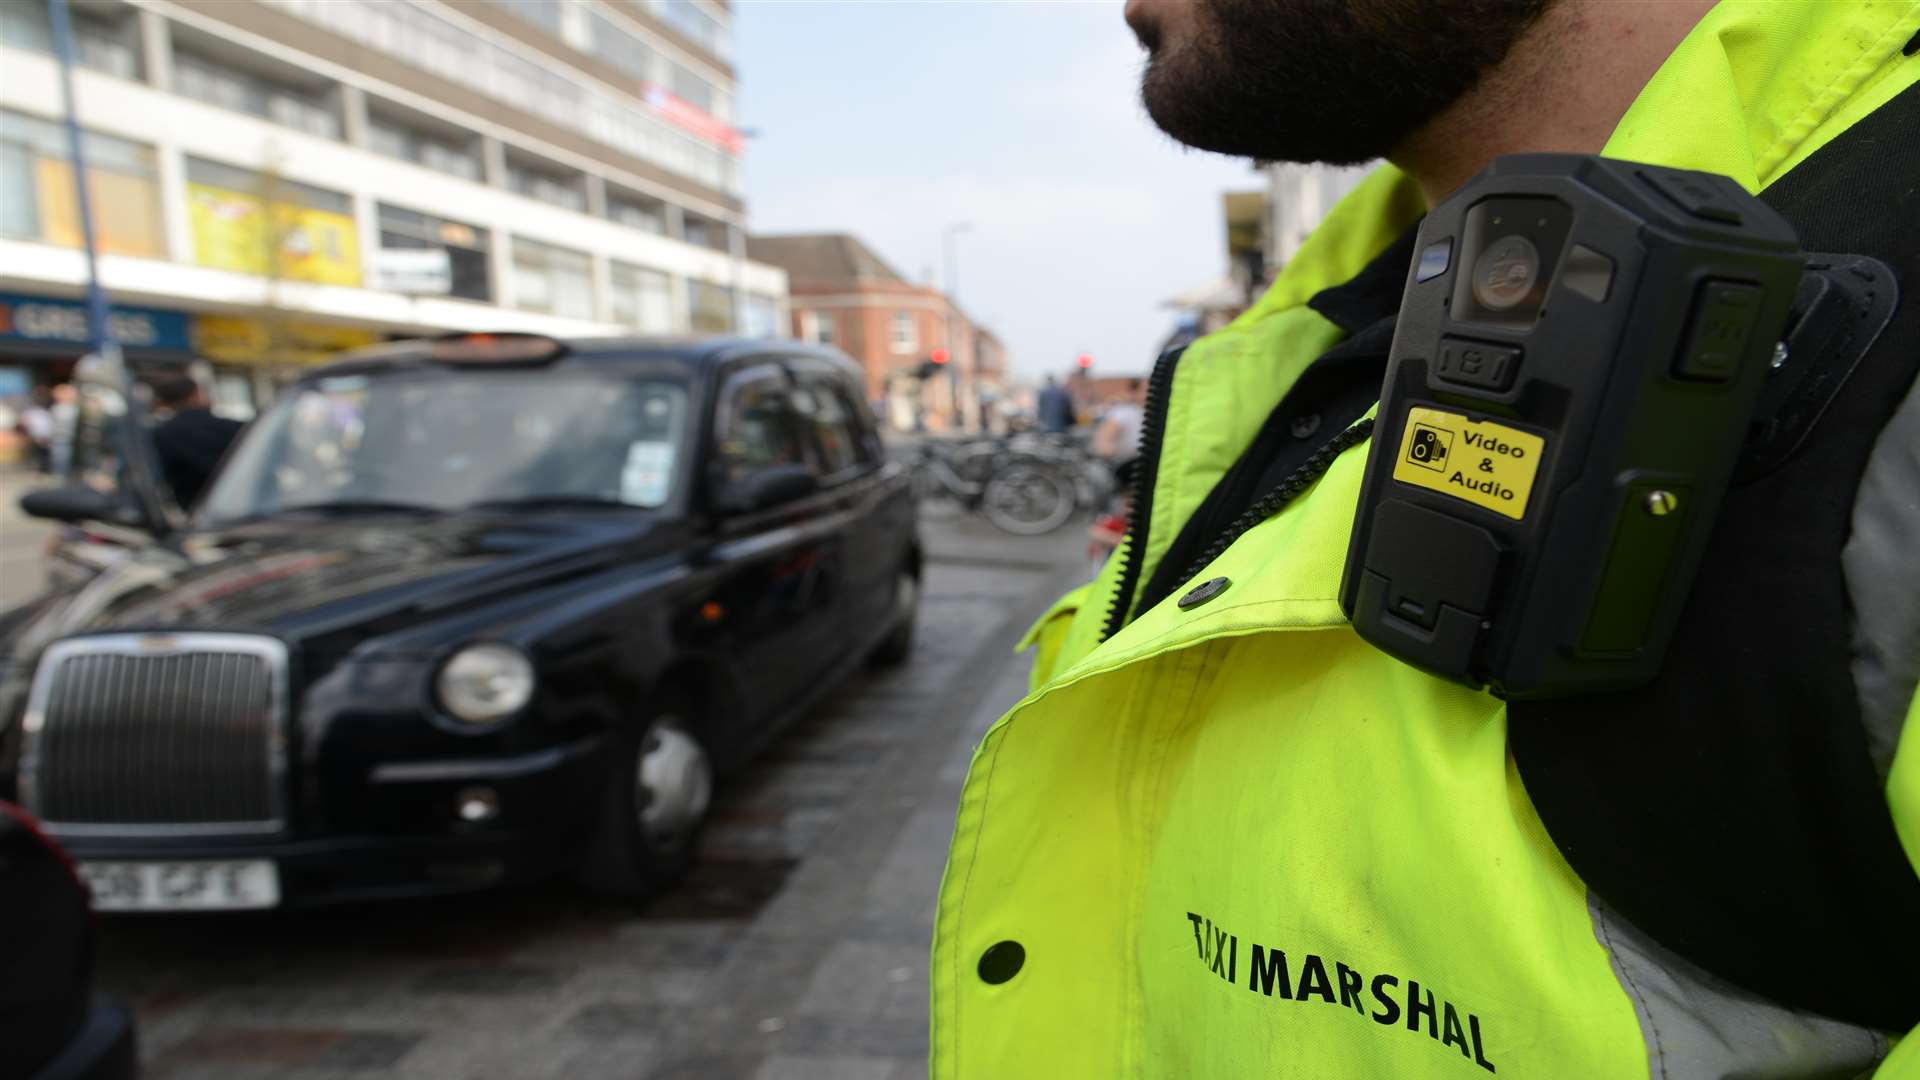 Taxi marshal with body camera in King Street, Maidstone